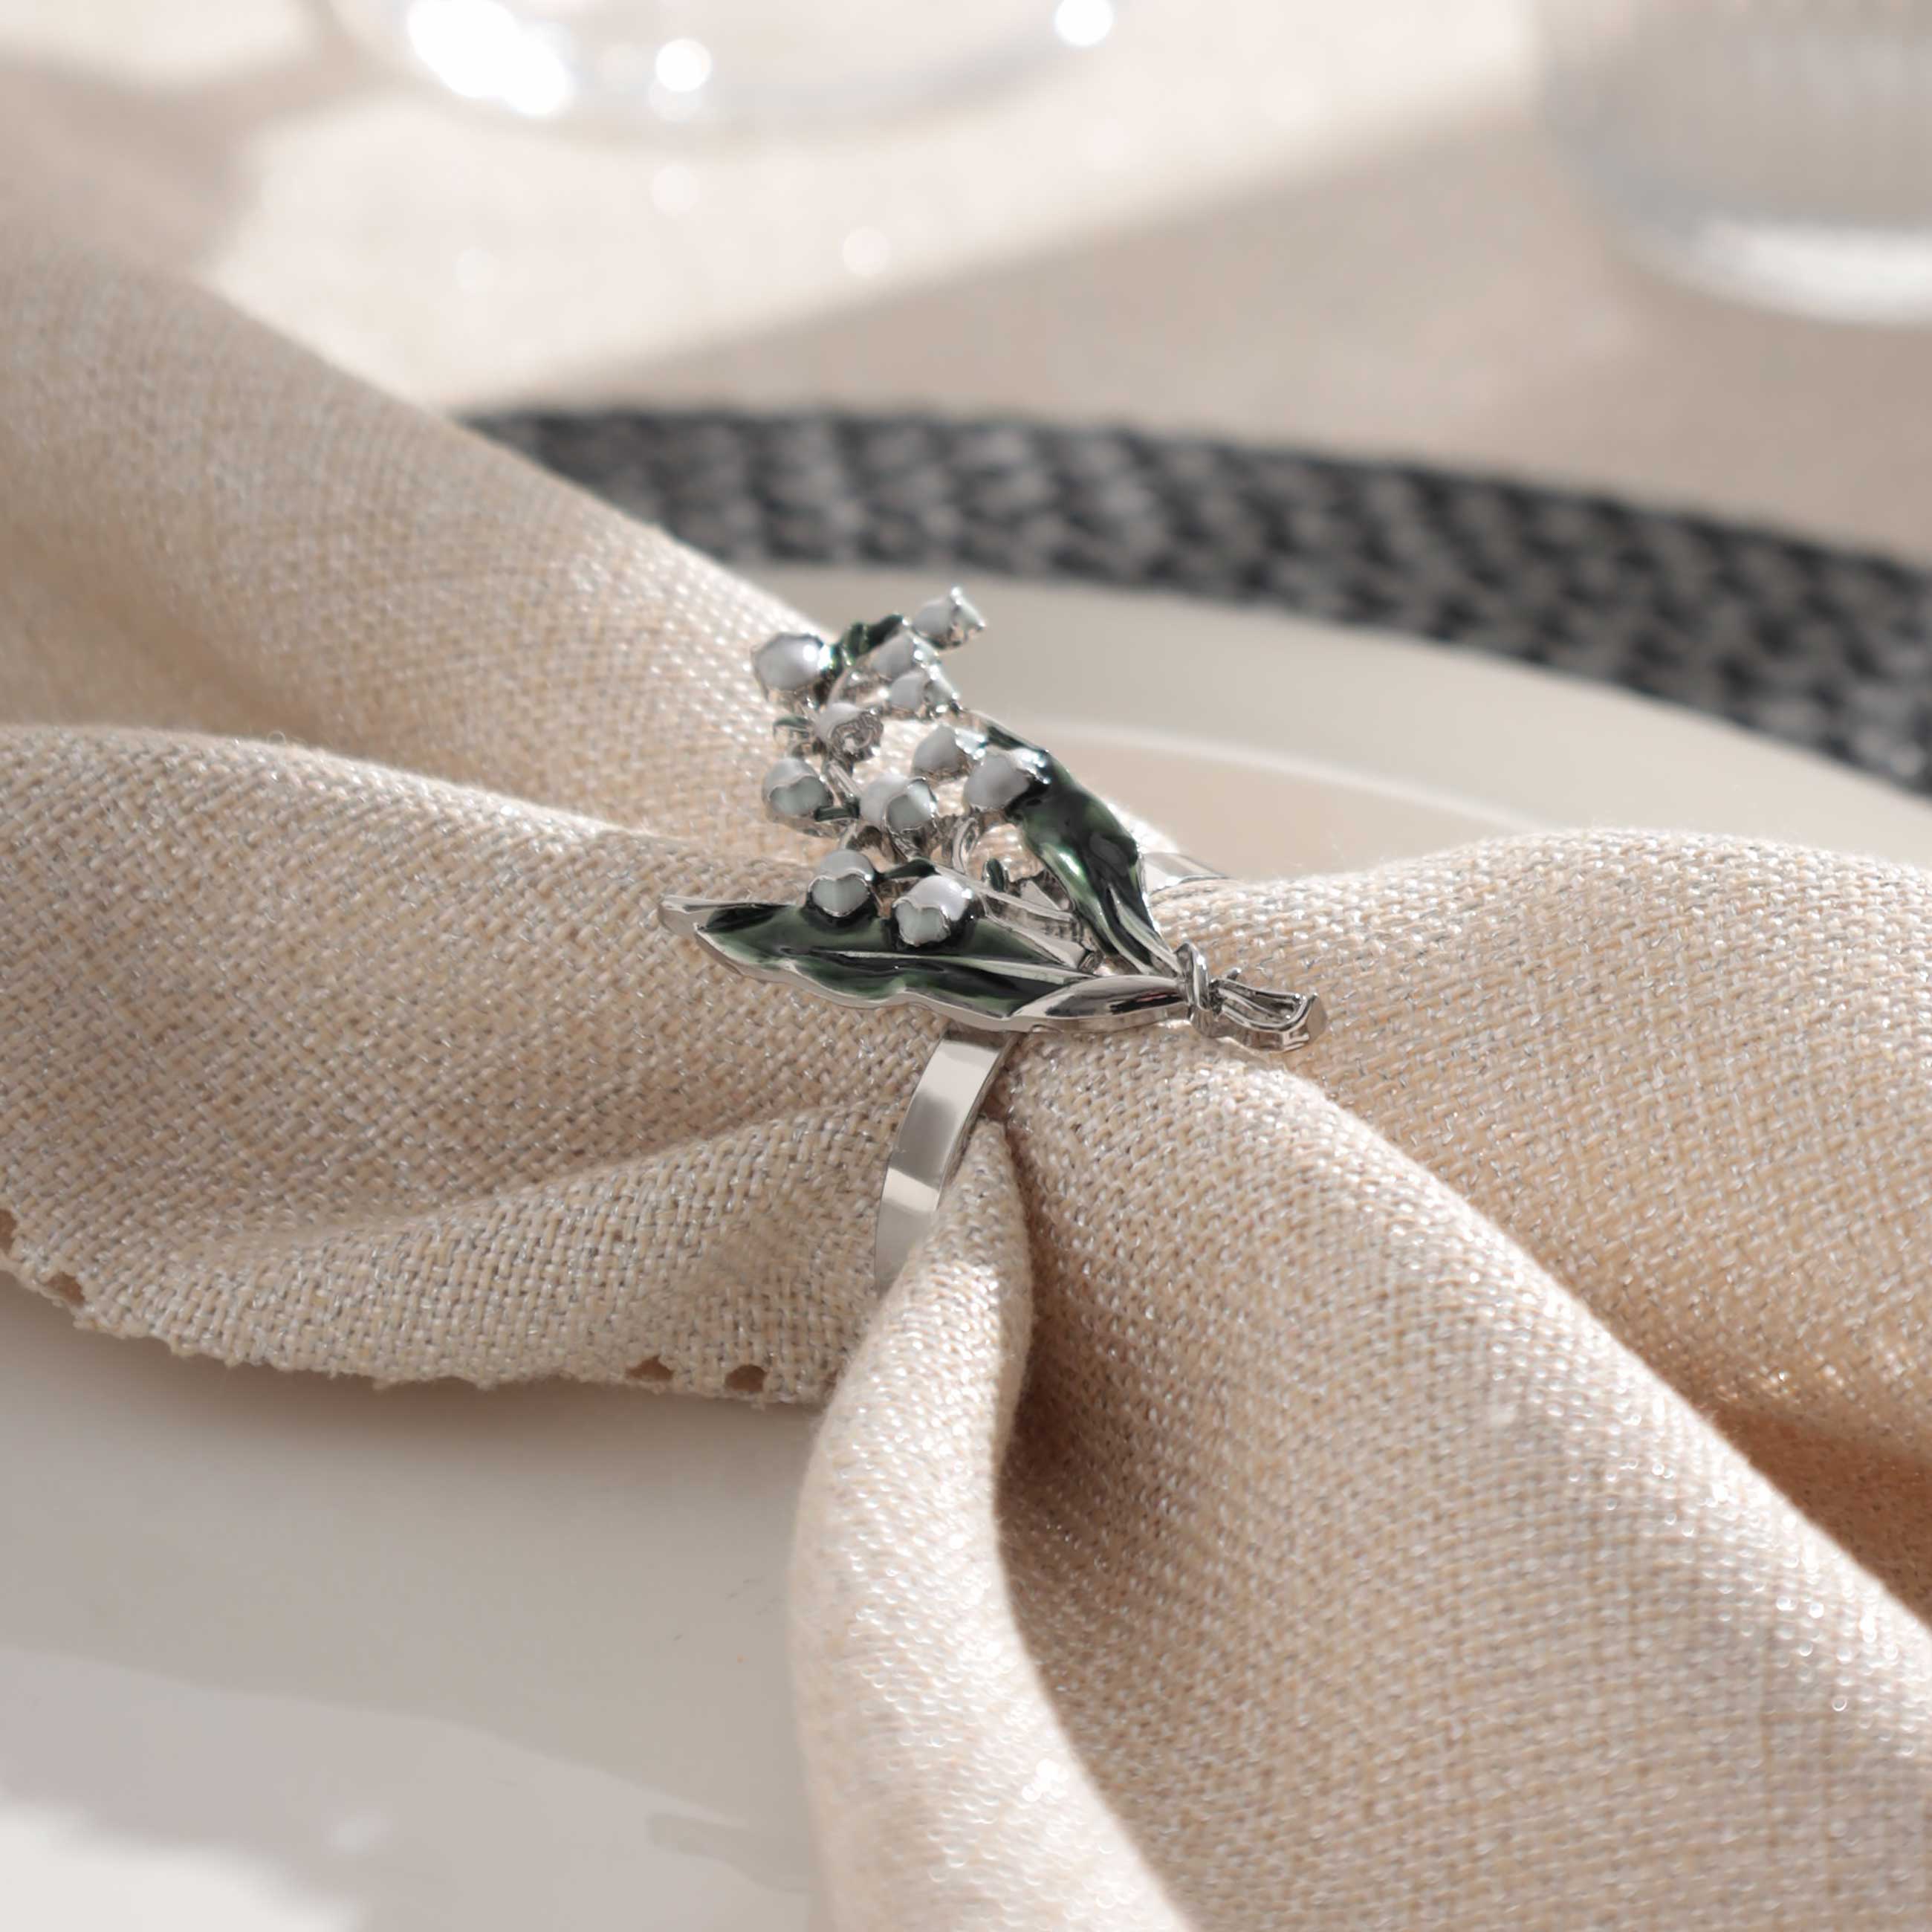 Napkin ring, 5 cm, metal, green-gold, Lily of the valley with leaves, May-lily изображение № 3